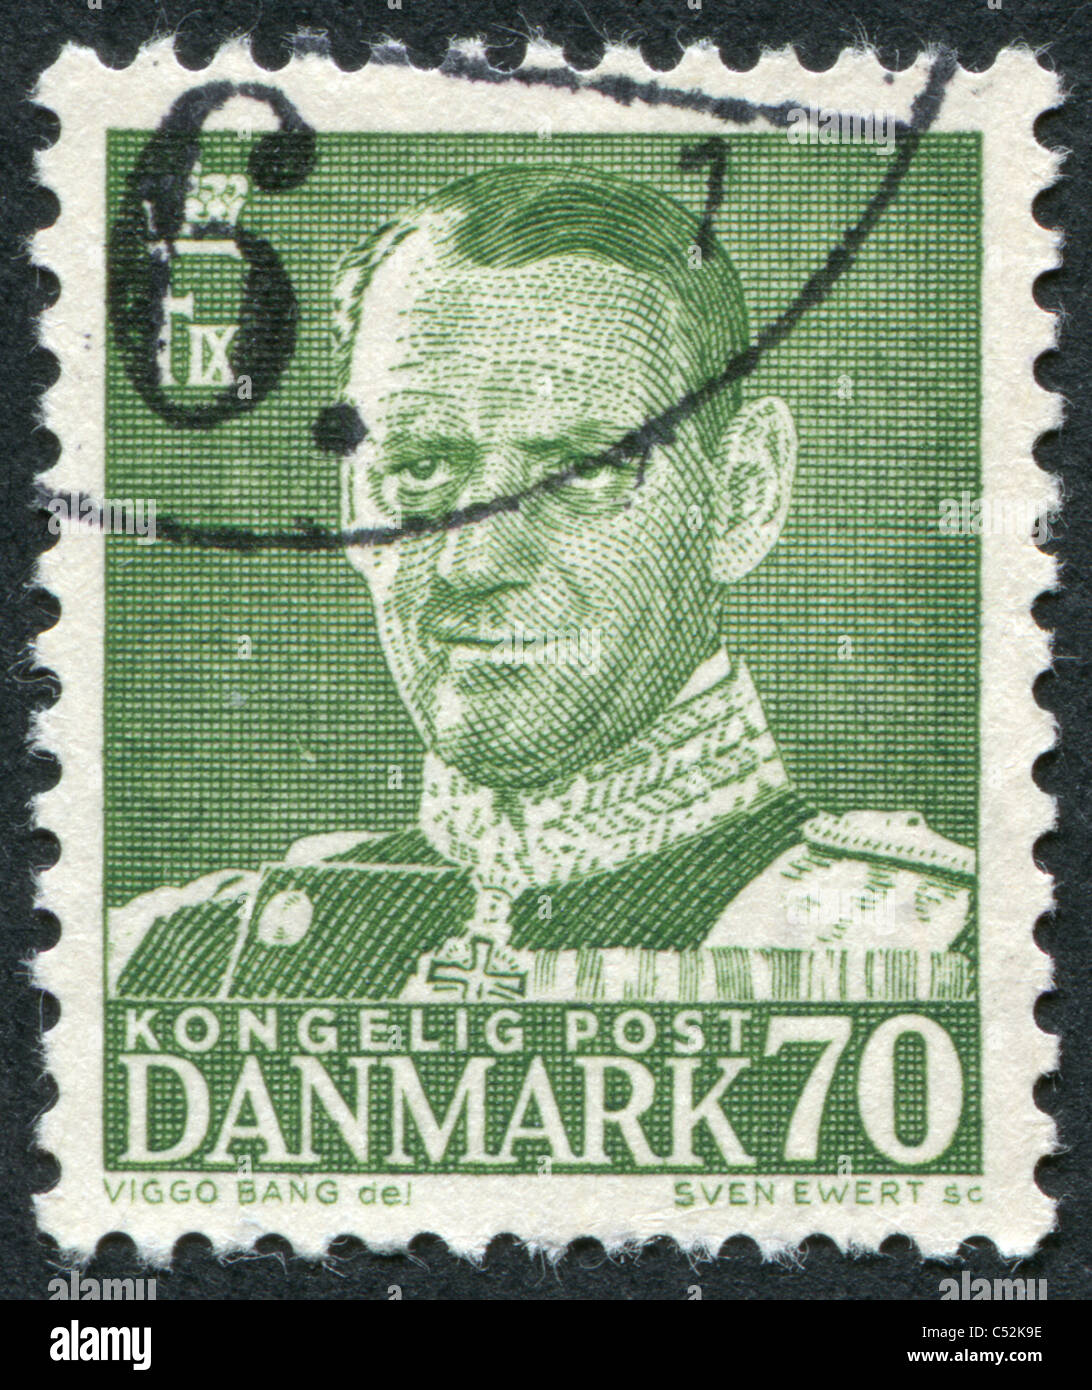 DENMARK 1950: A stamp printed in the Denmark, depicts King Frederick IX Stock Photo